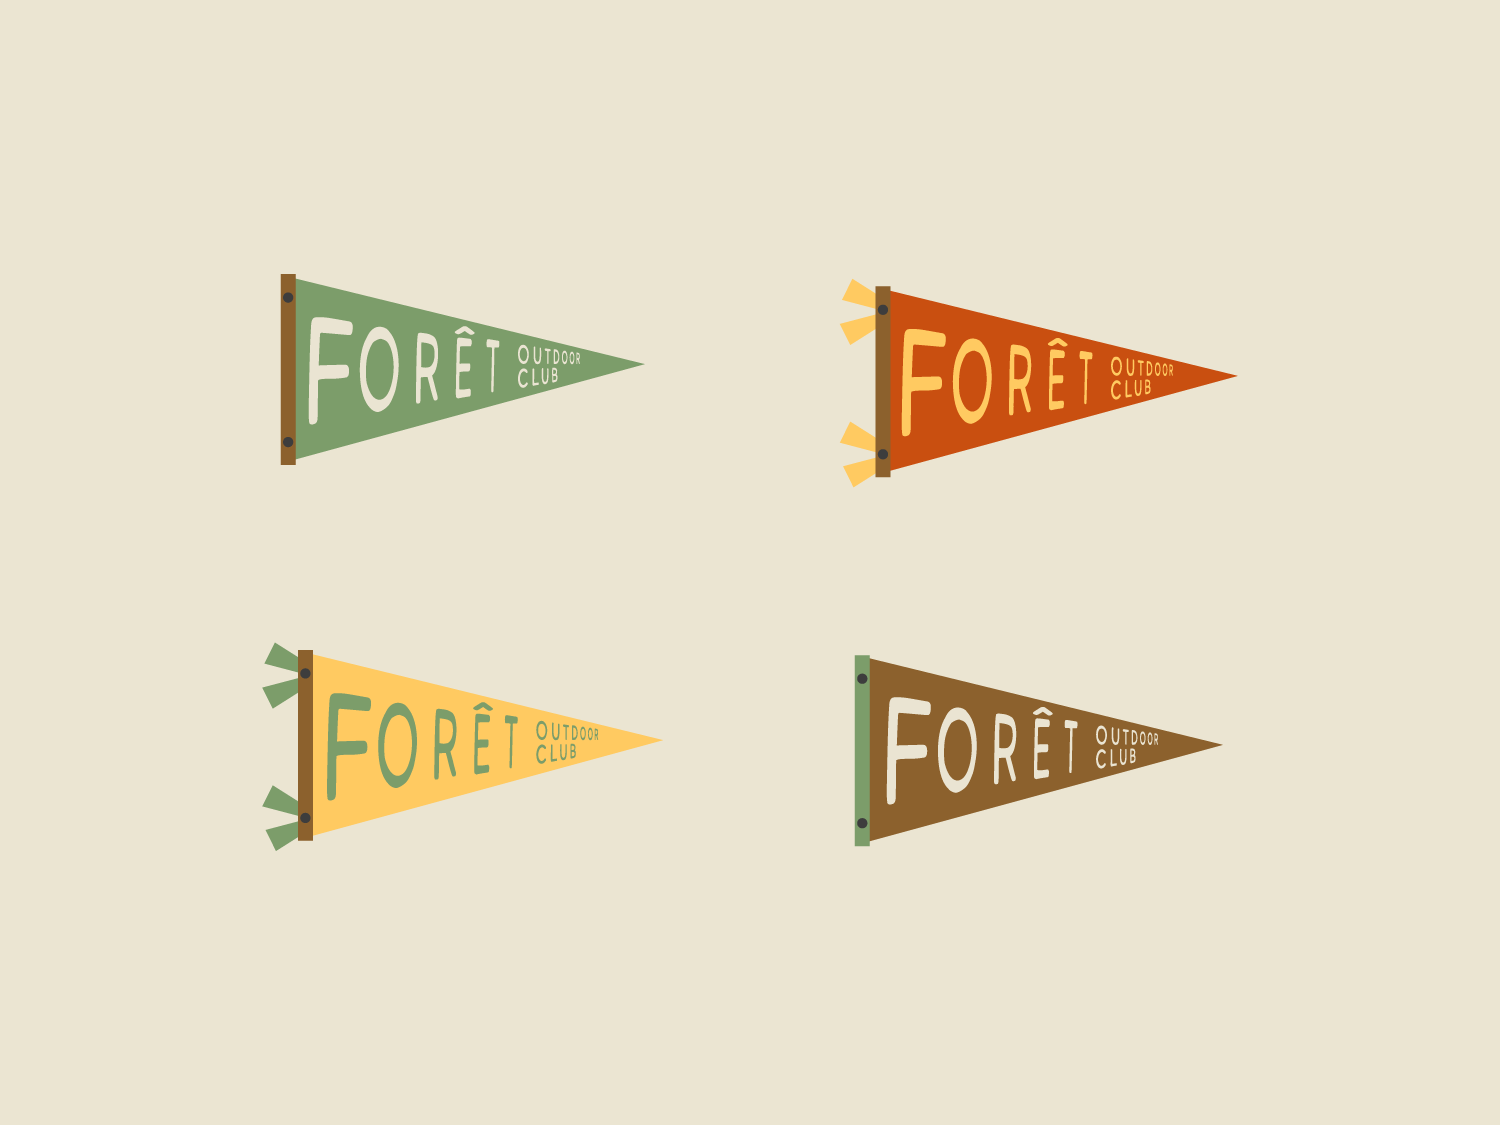 A mockup of camp style flag illustrations that say forêt outdoor club.